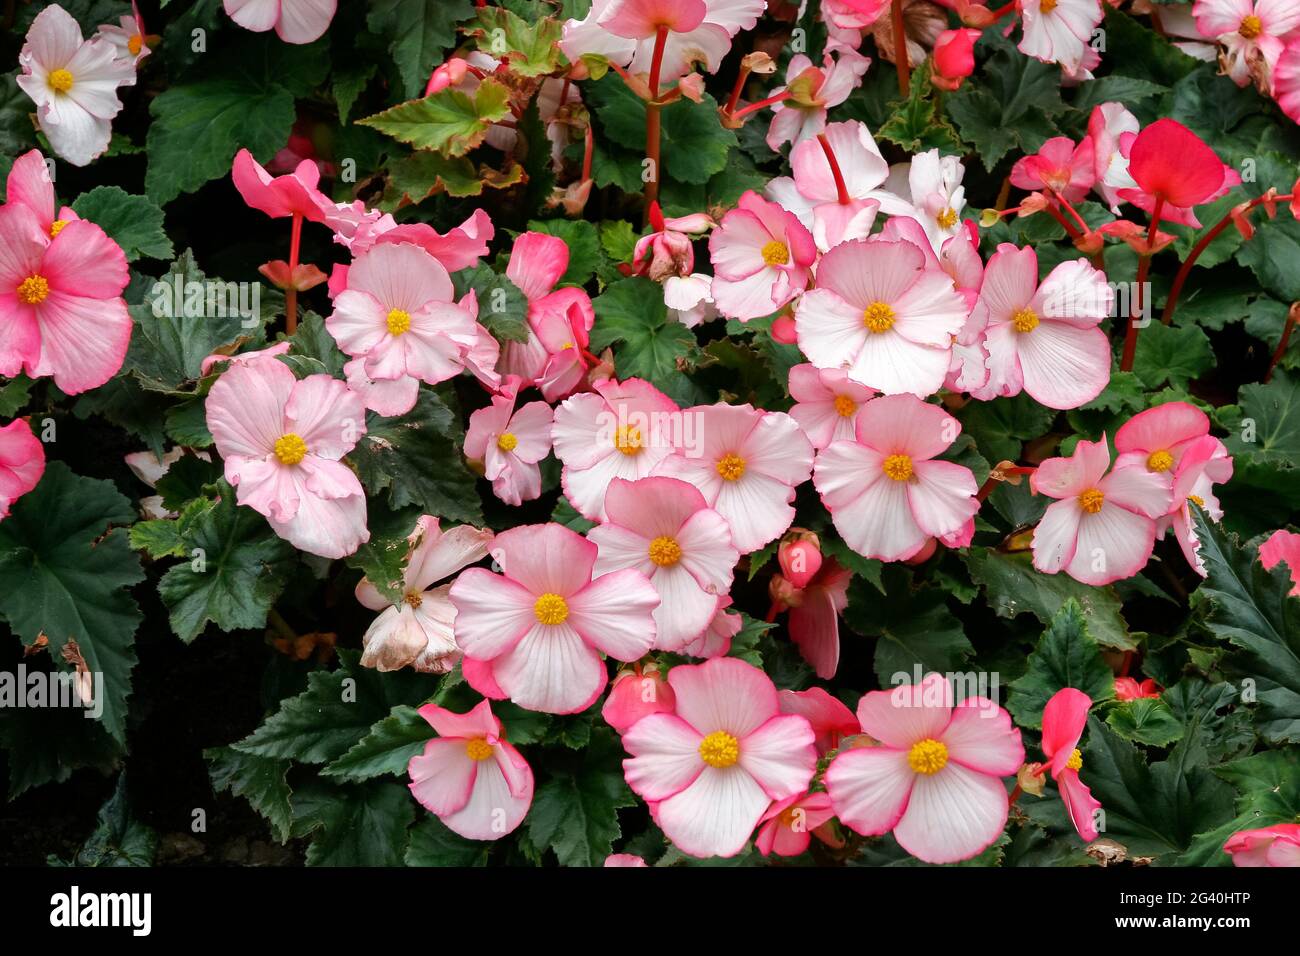 A mass of pink Begonia flowers at Butchart Gardens Stock Photo